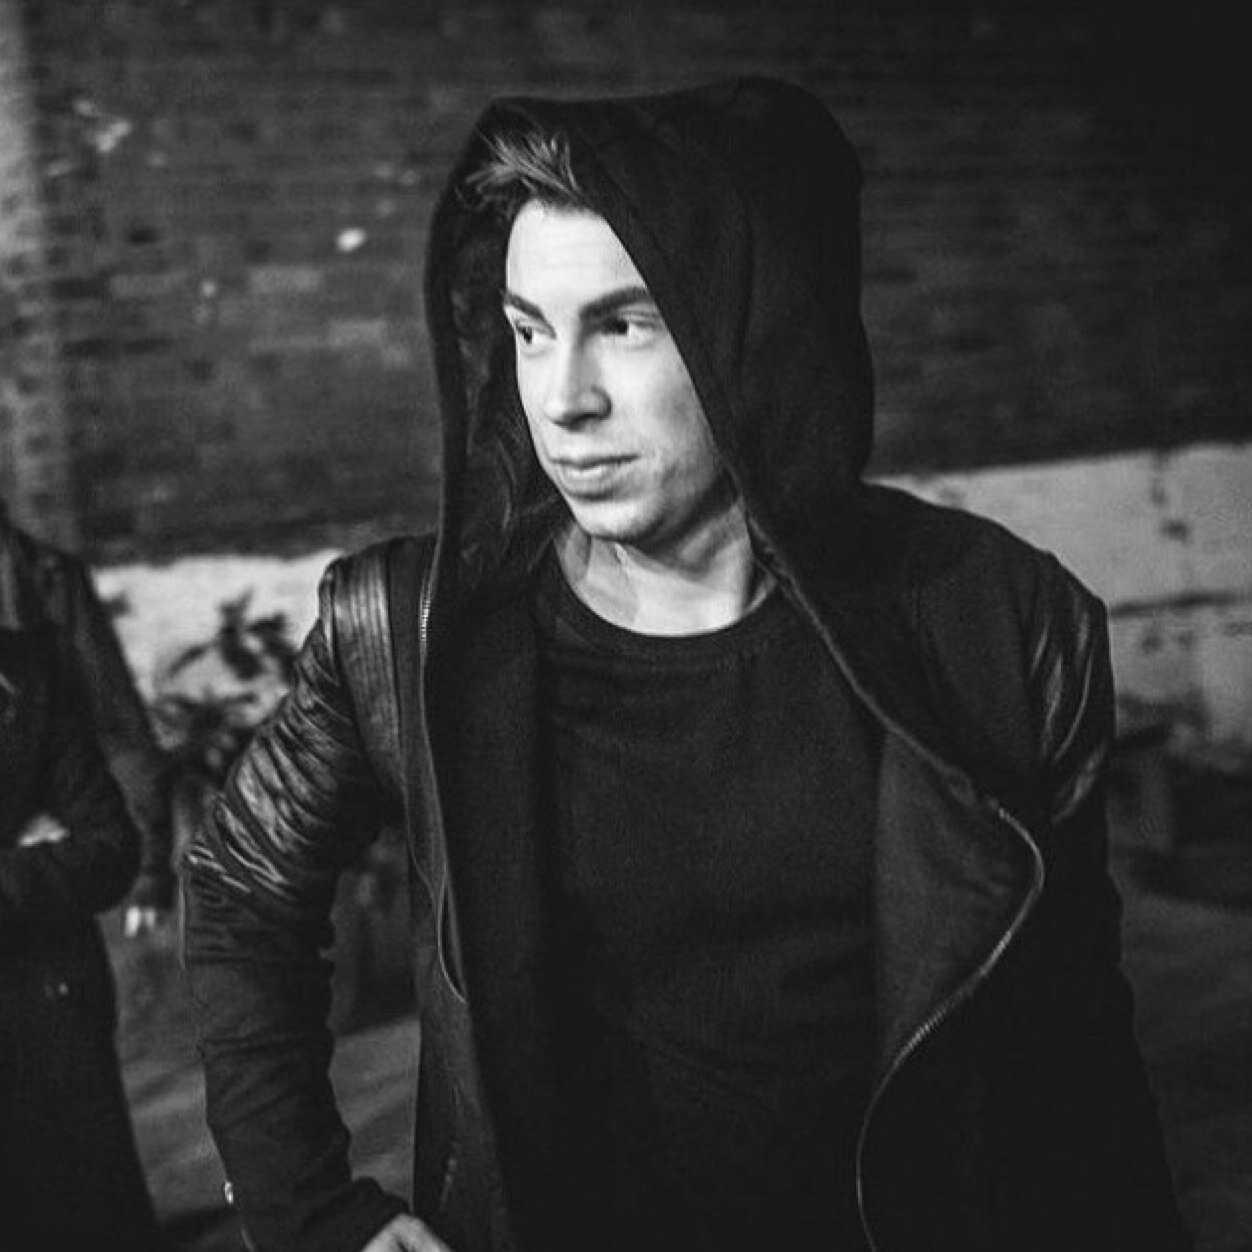 Go hardwell or go home. Eat, sleep, @HARDWELL, Repeat! If you can dream it, you can do it #HardwellFamily 16/07/16